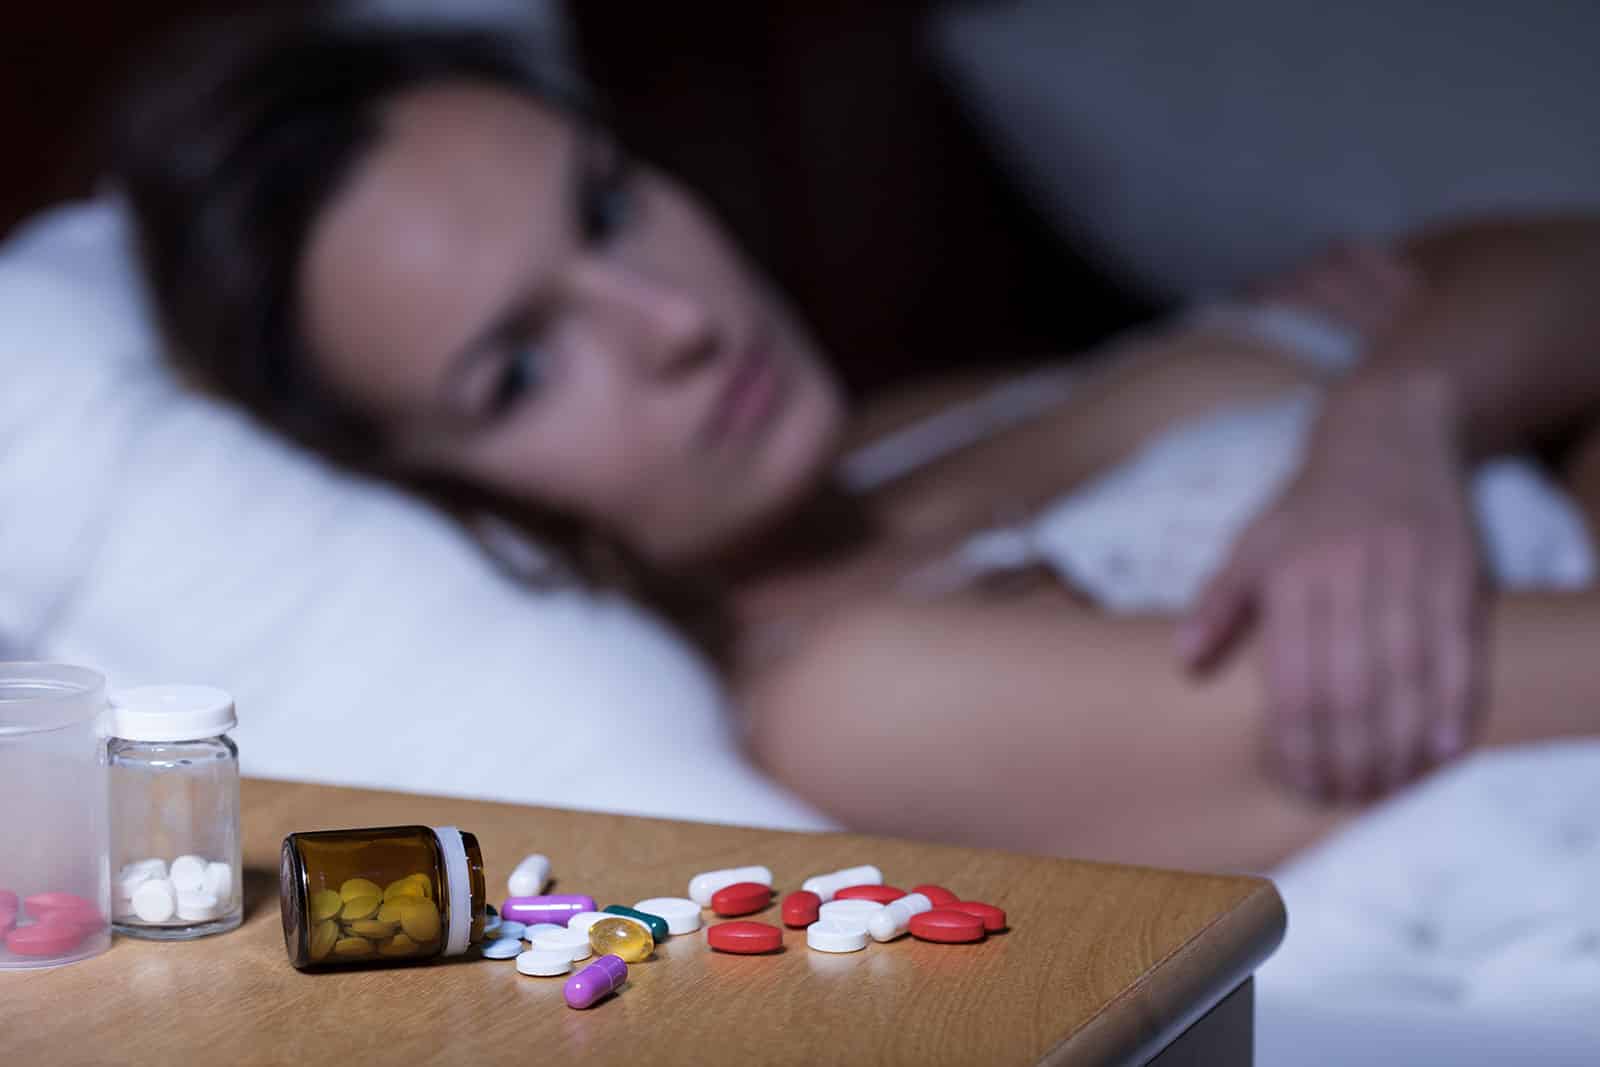 Trazodone and Ambien: Similarities, Differences, Uses, and More